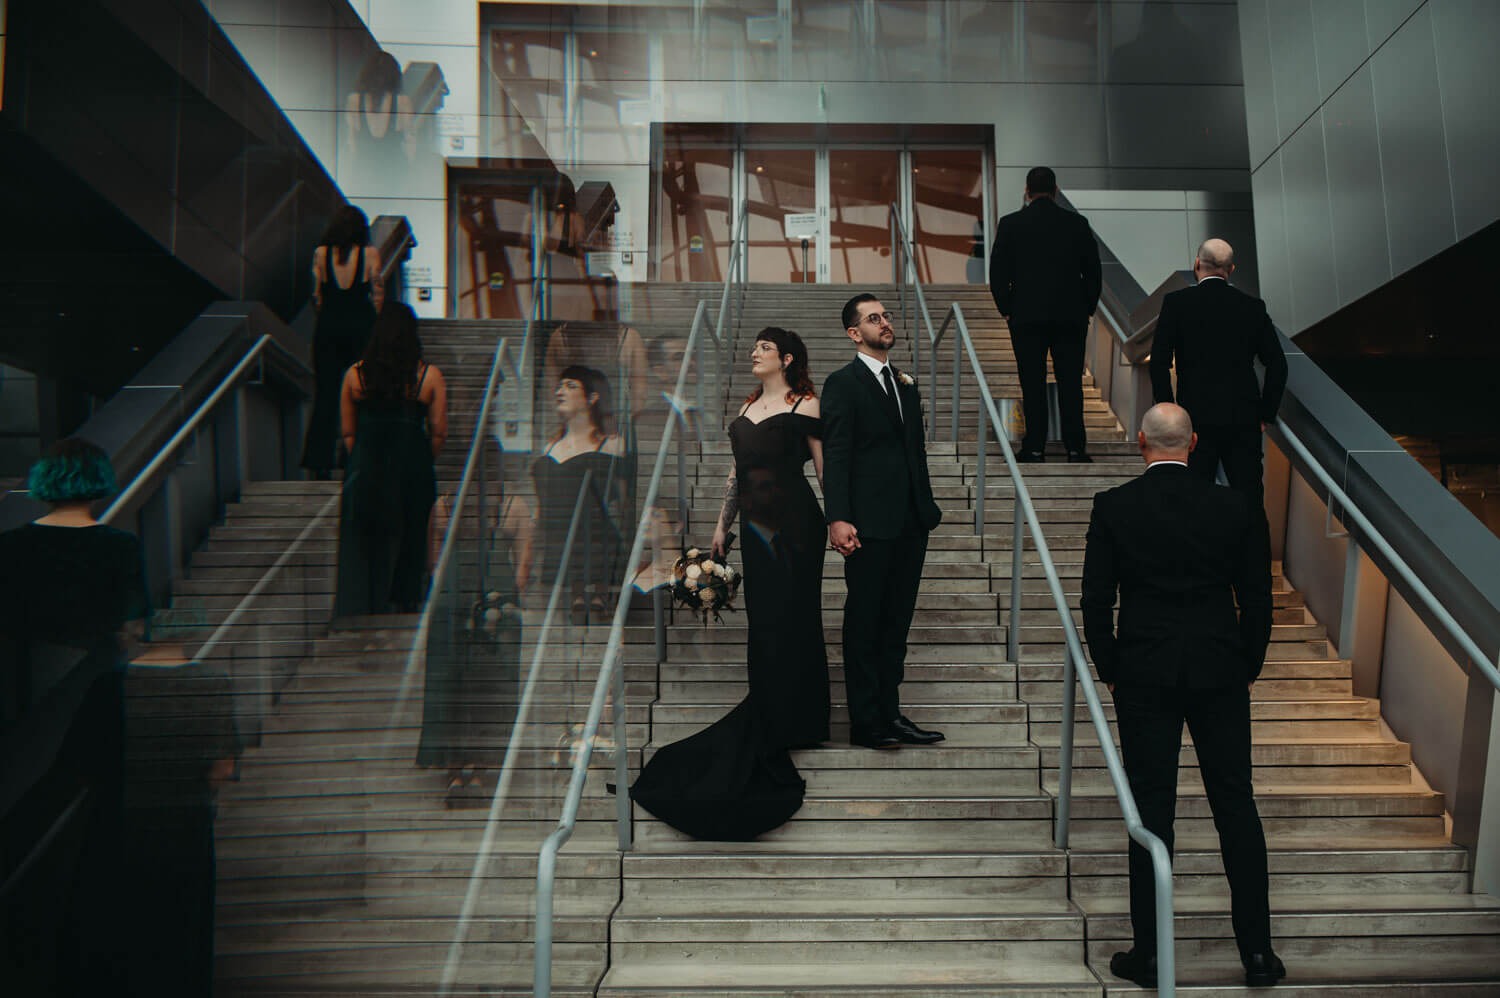 Wedding couple stand on steps with wedding party as a reflection is used to create a unique photo at Akron Art Museum.